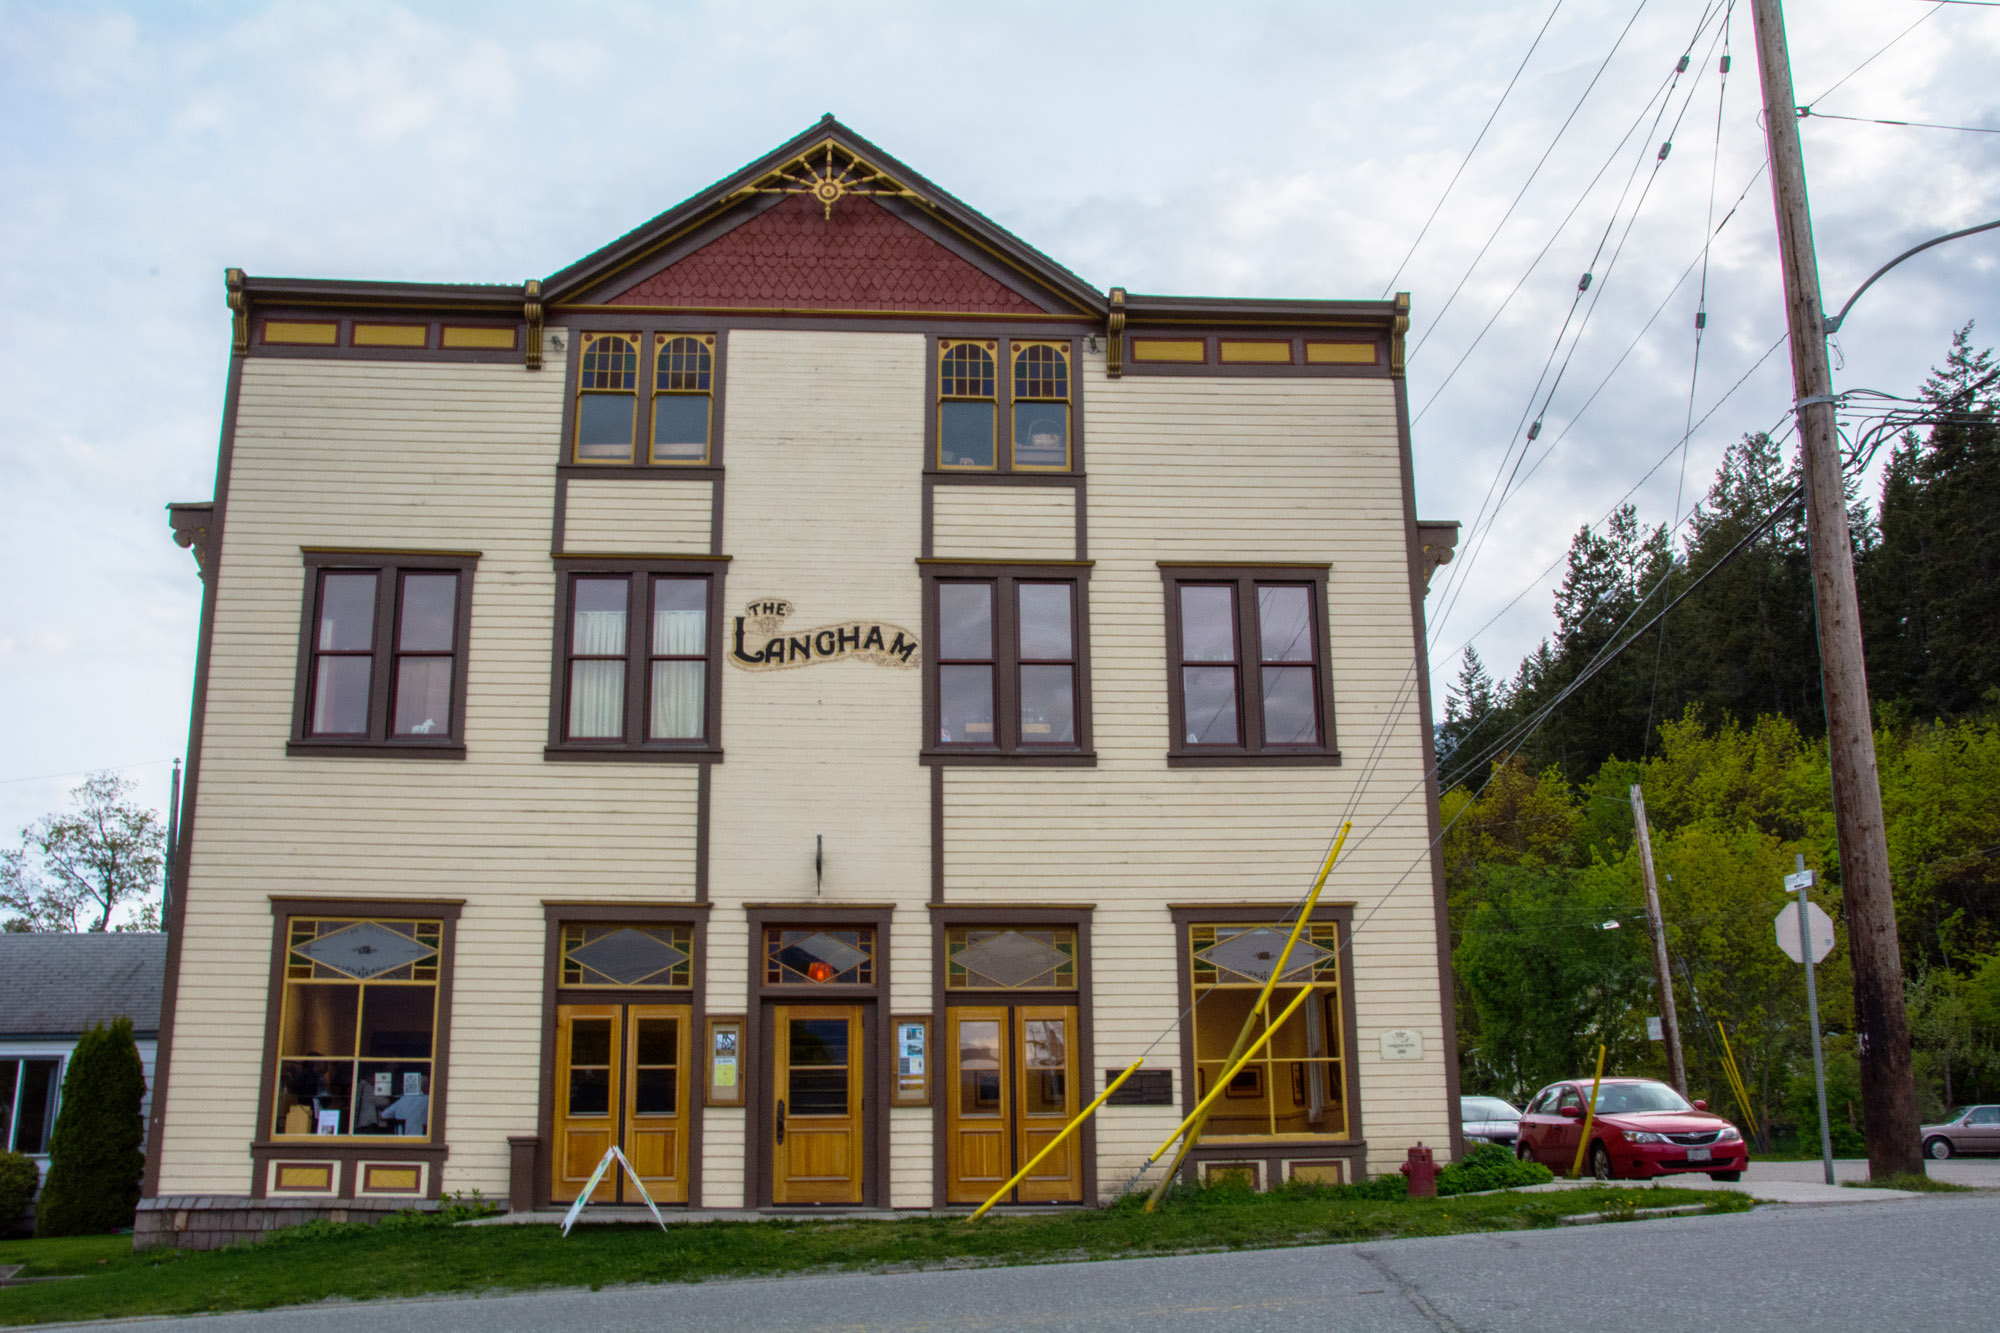 The Langham Cultural Centre building in Kaslo, BC.